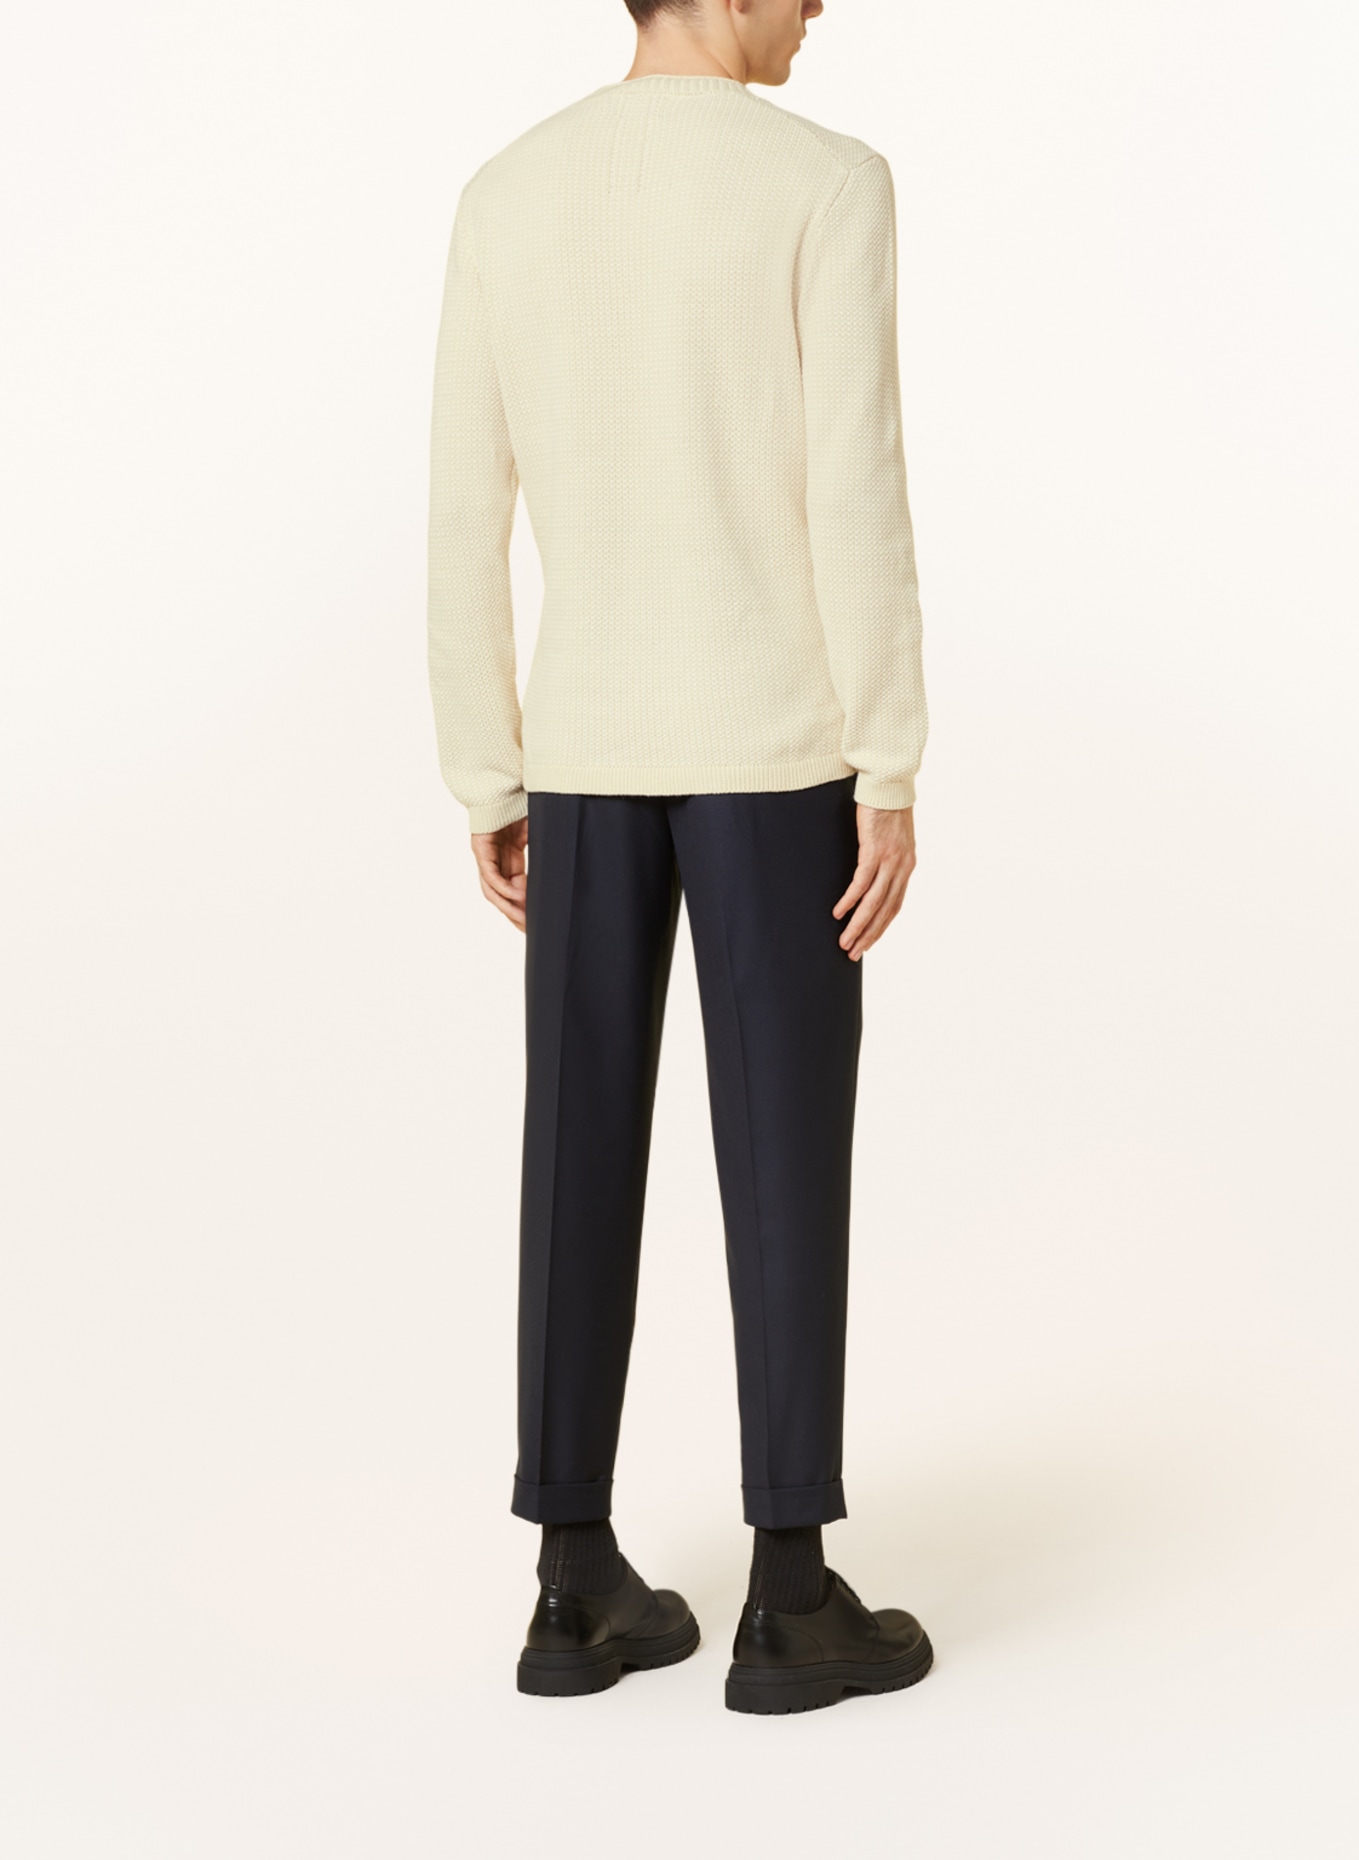 NOWADAYS Sweater, Color: BEIGE/ WHITE (Image 3)